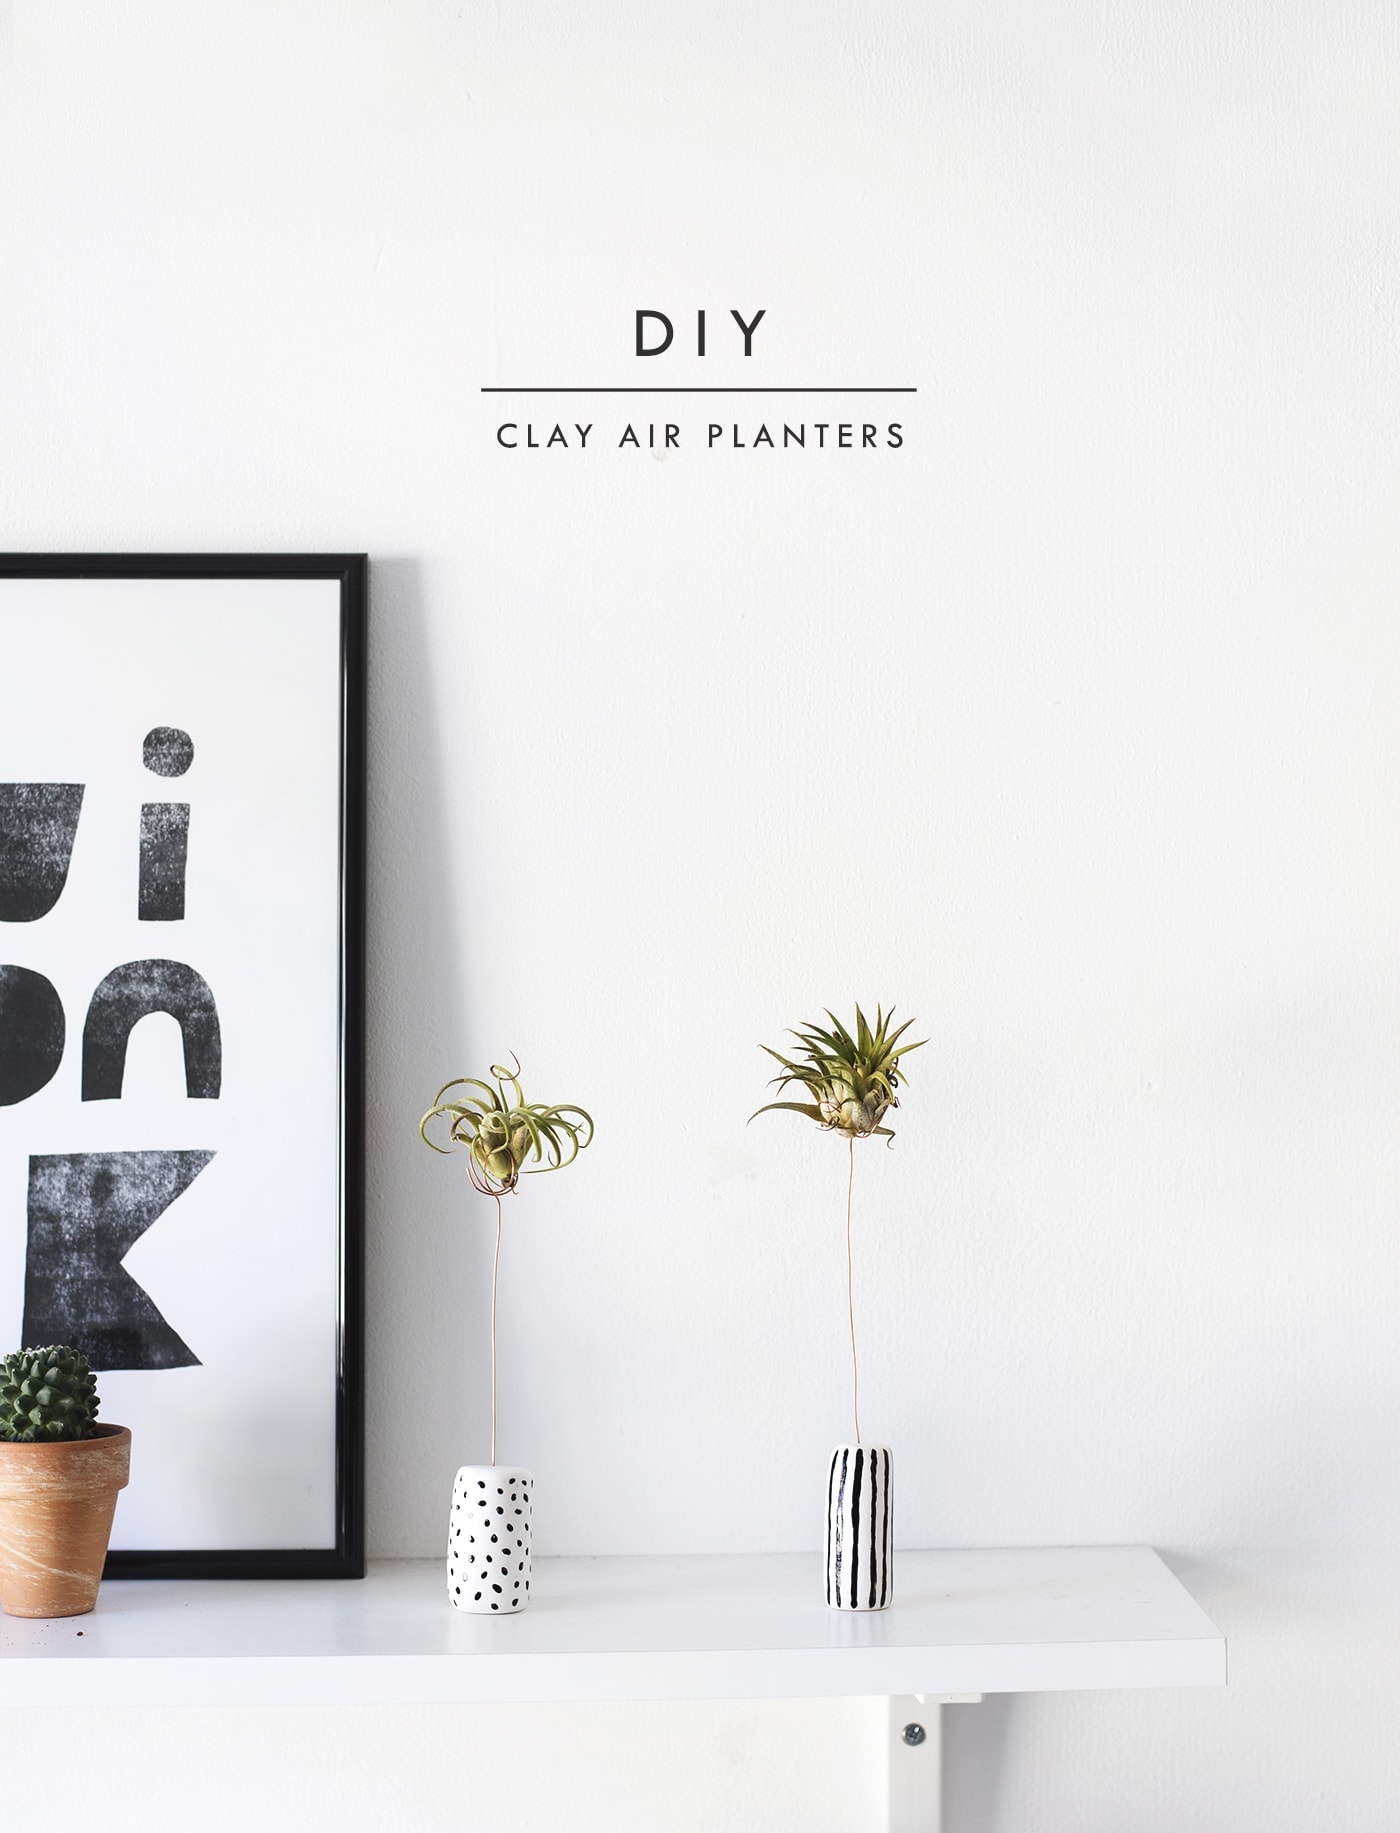 DIY air planters made with clay | easy craft ideas